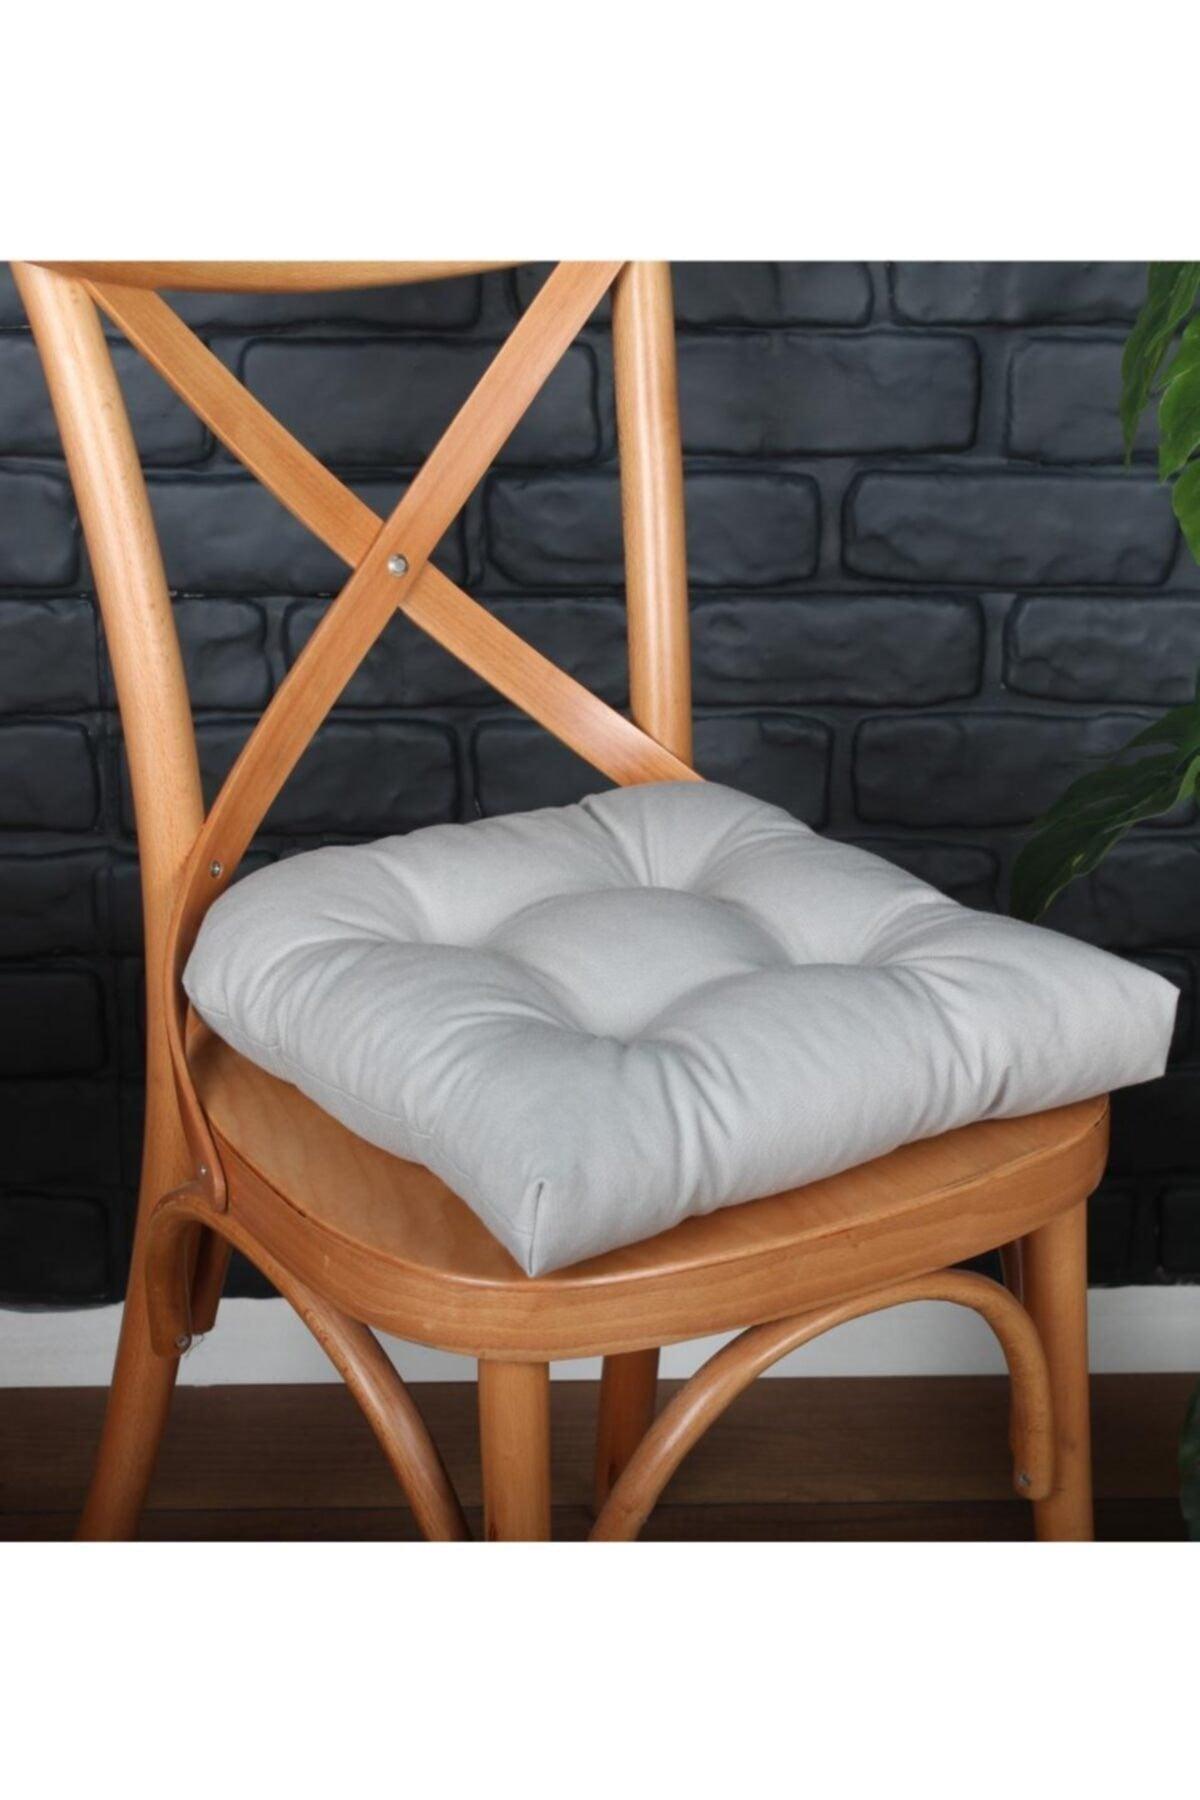 Lux Pofidik Gray Chair Cushion Specially Stitched Laced 40x40cm - Swordslife